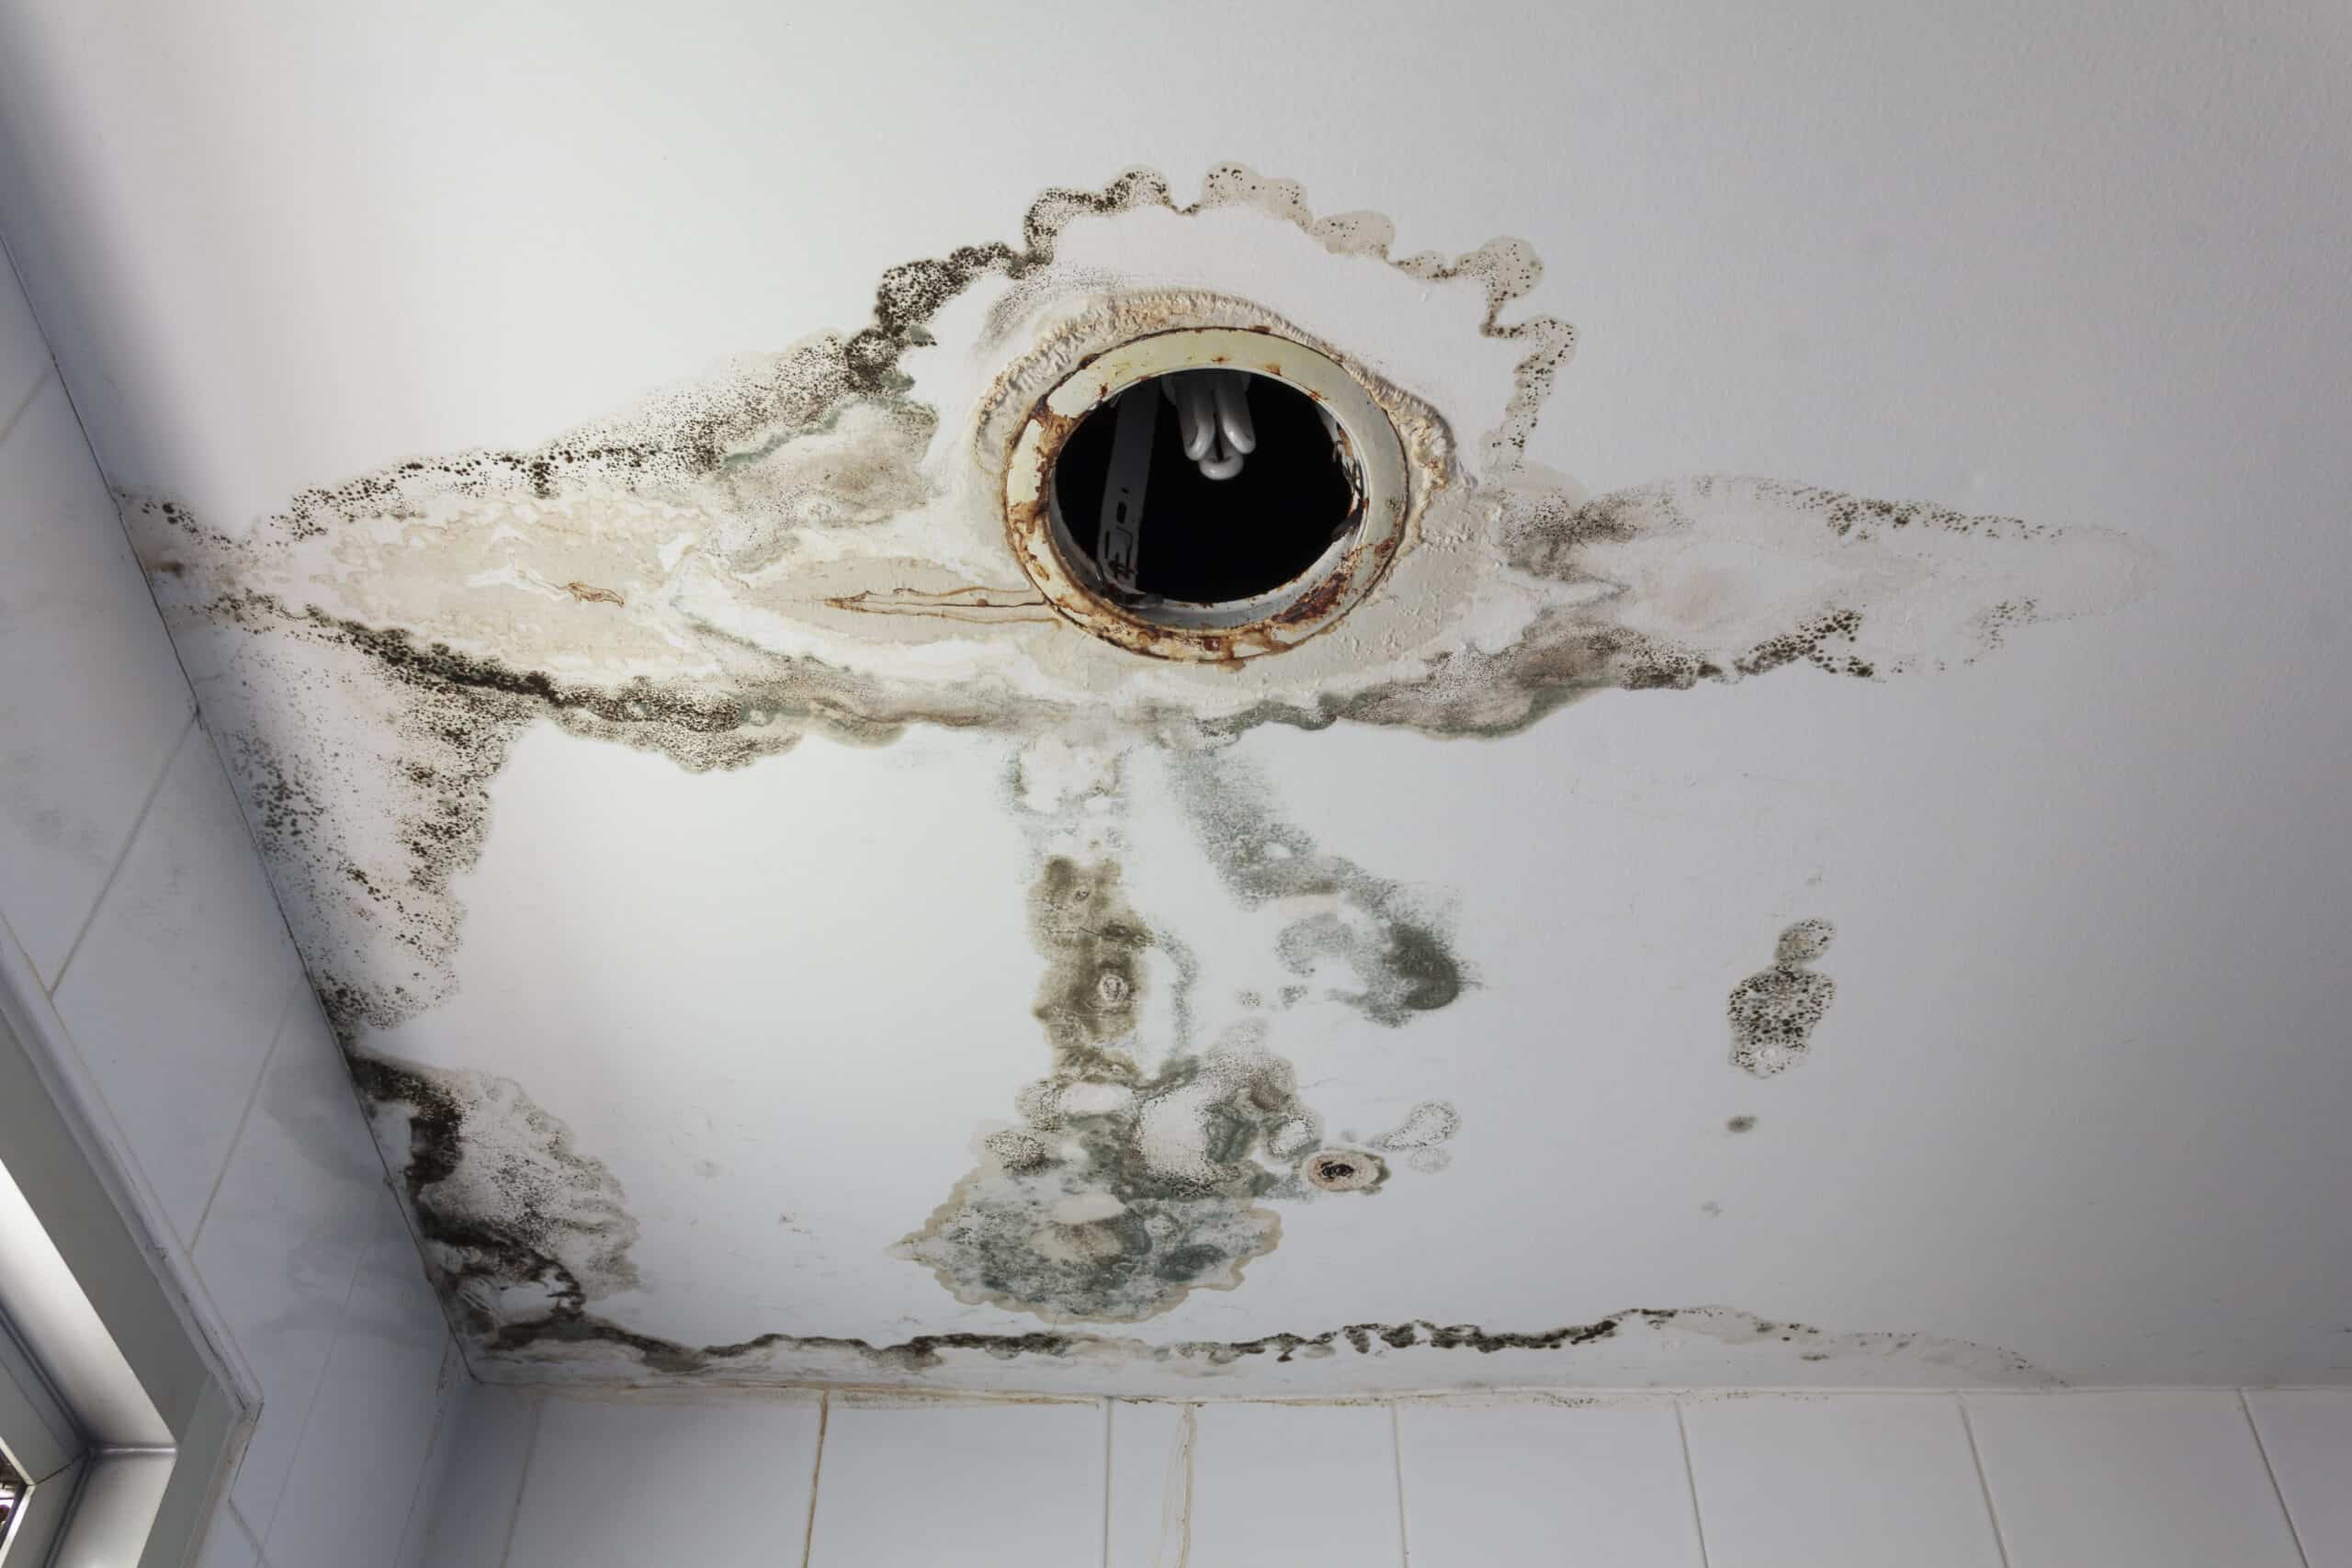 Water,Leaking,From,Ceiling,Make,Damaged,Lamp